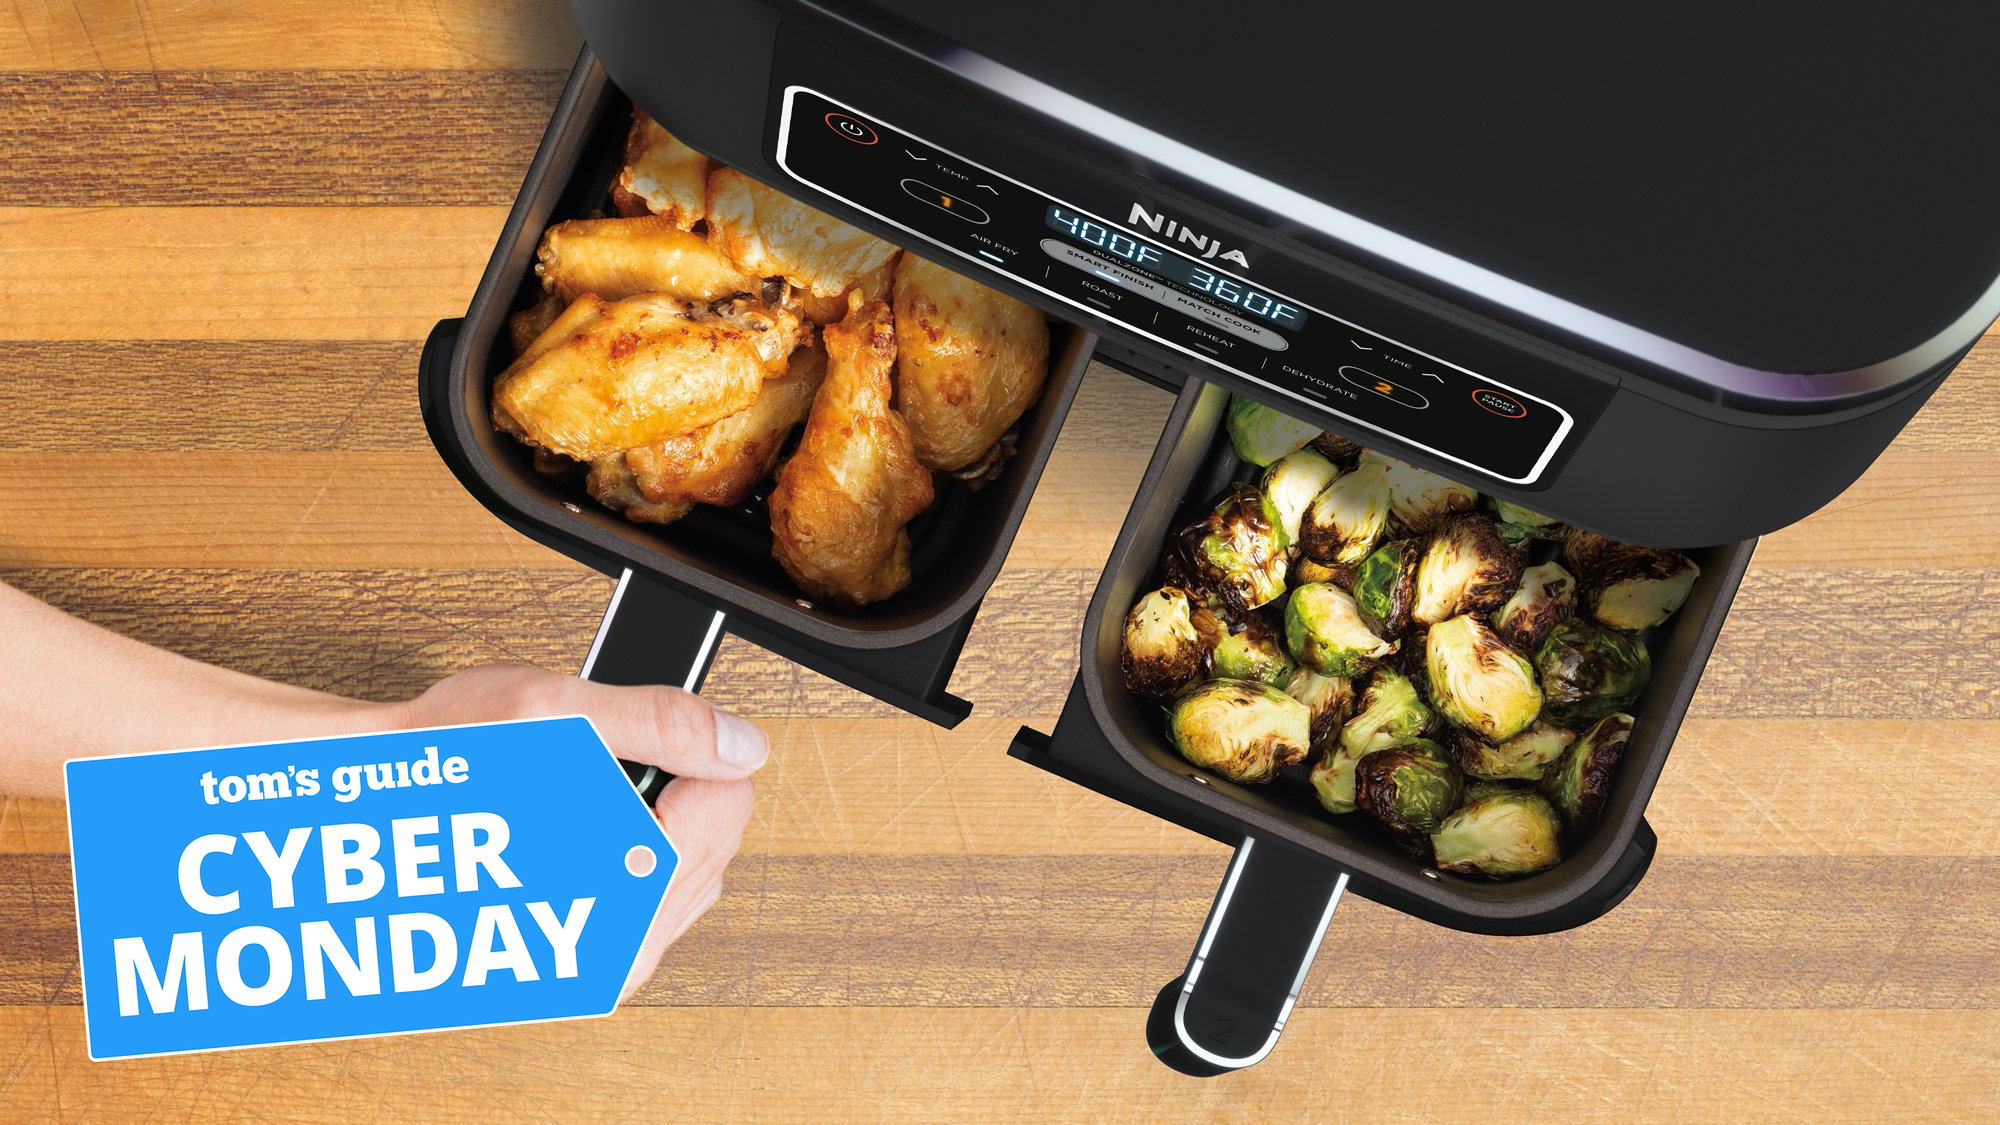 A hand pulls out the baskets from a Ninja Foodi 4-in-1 8-quart air fryer with cyber monday tag